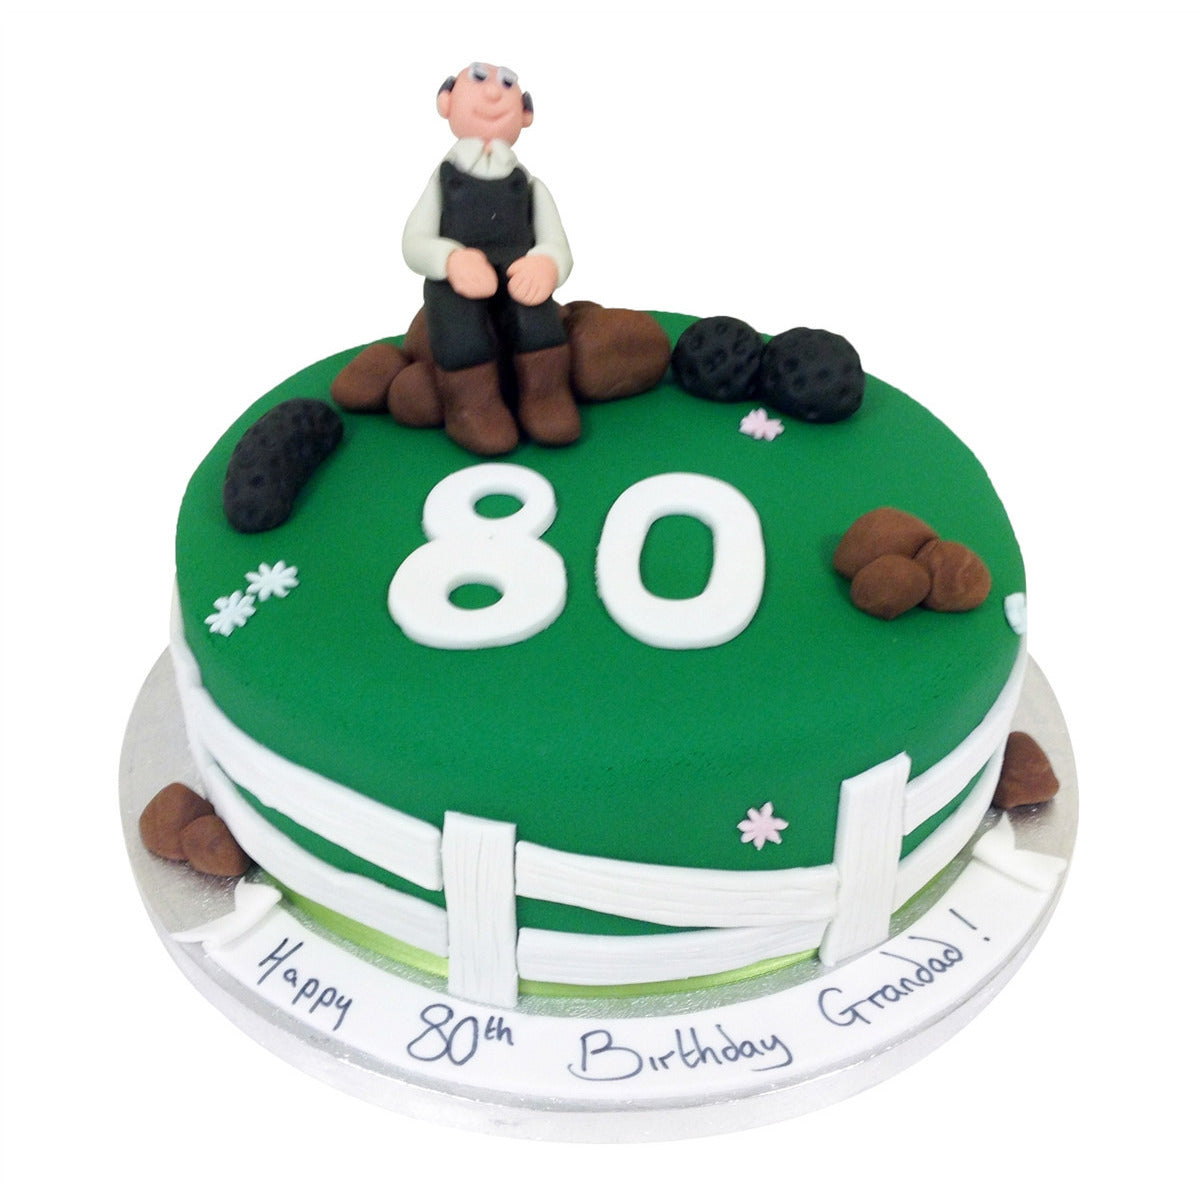 80th Birthday Cake - Buy Online, Free UK Delivery — New Cakes